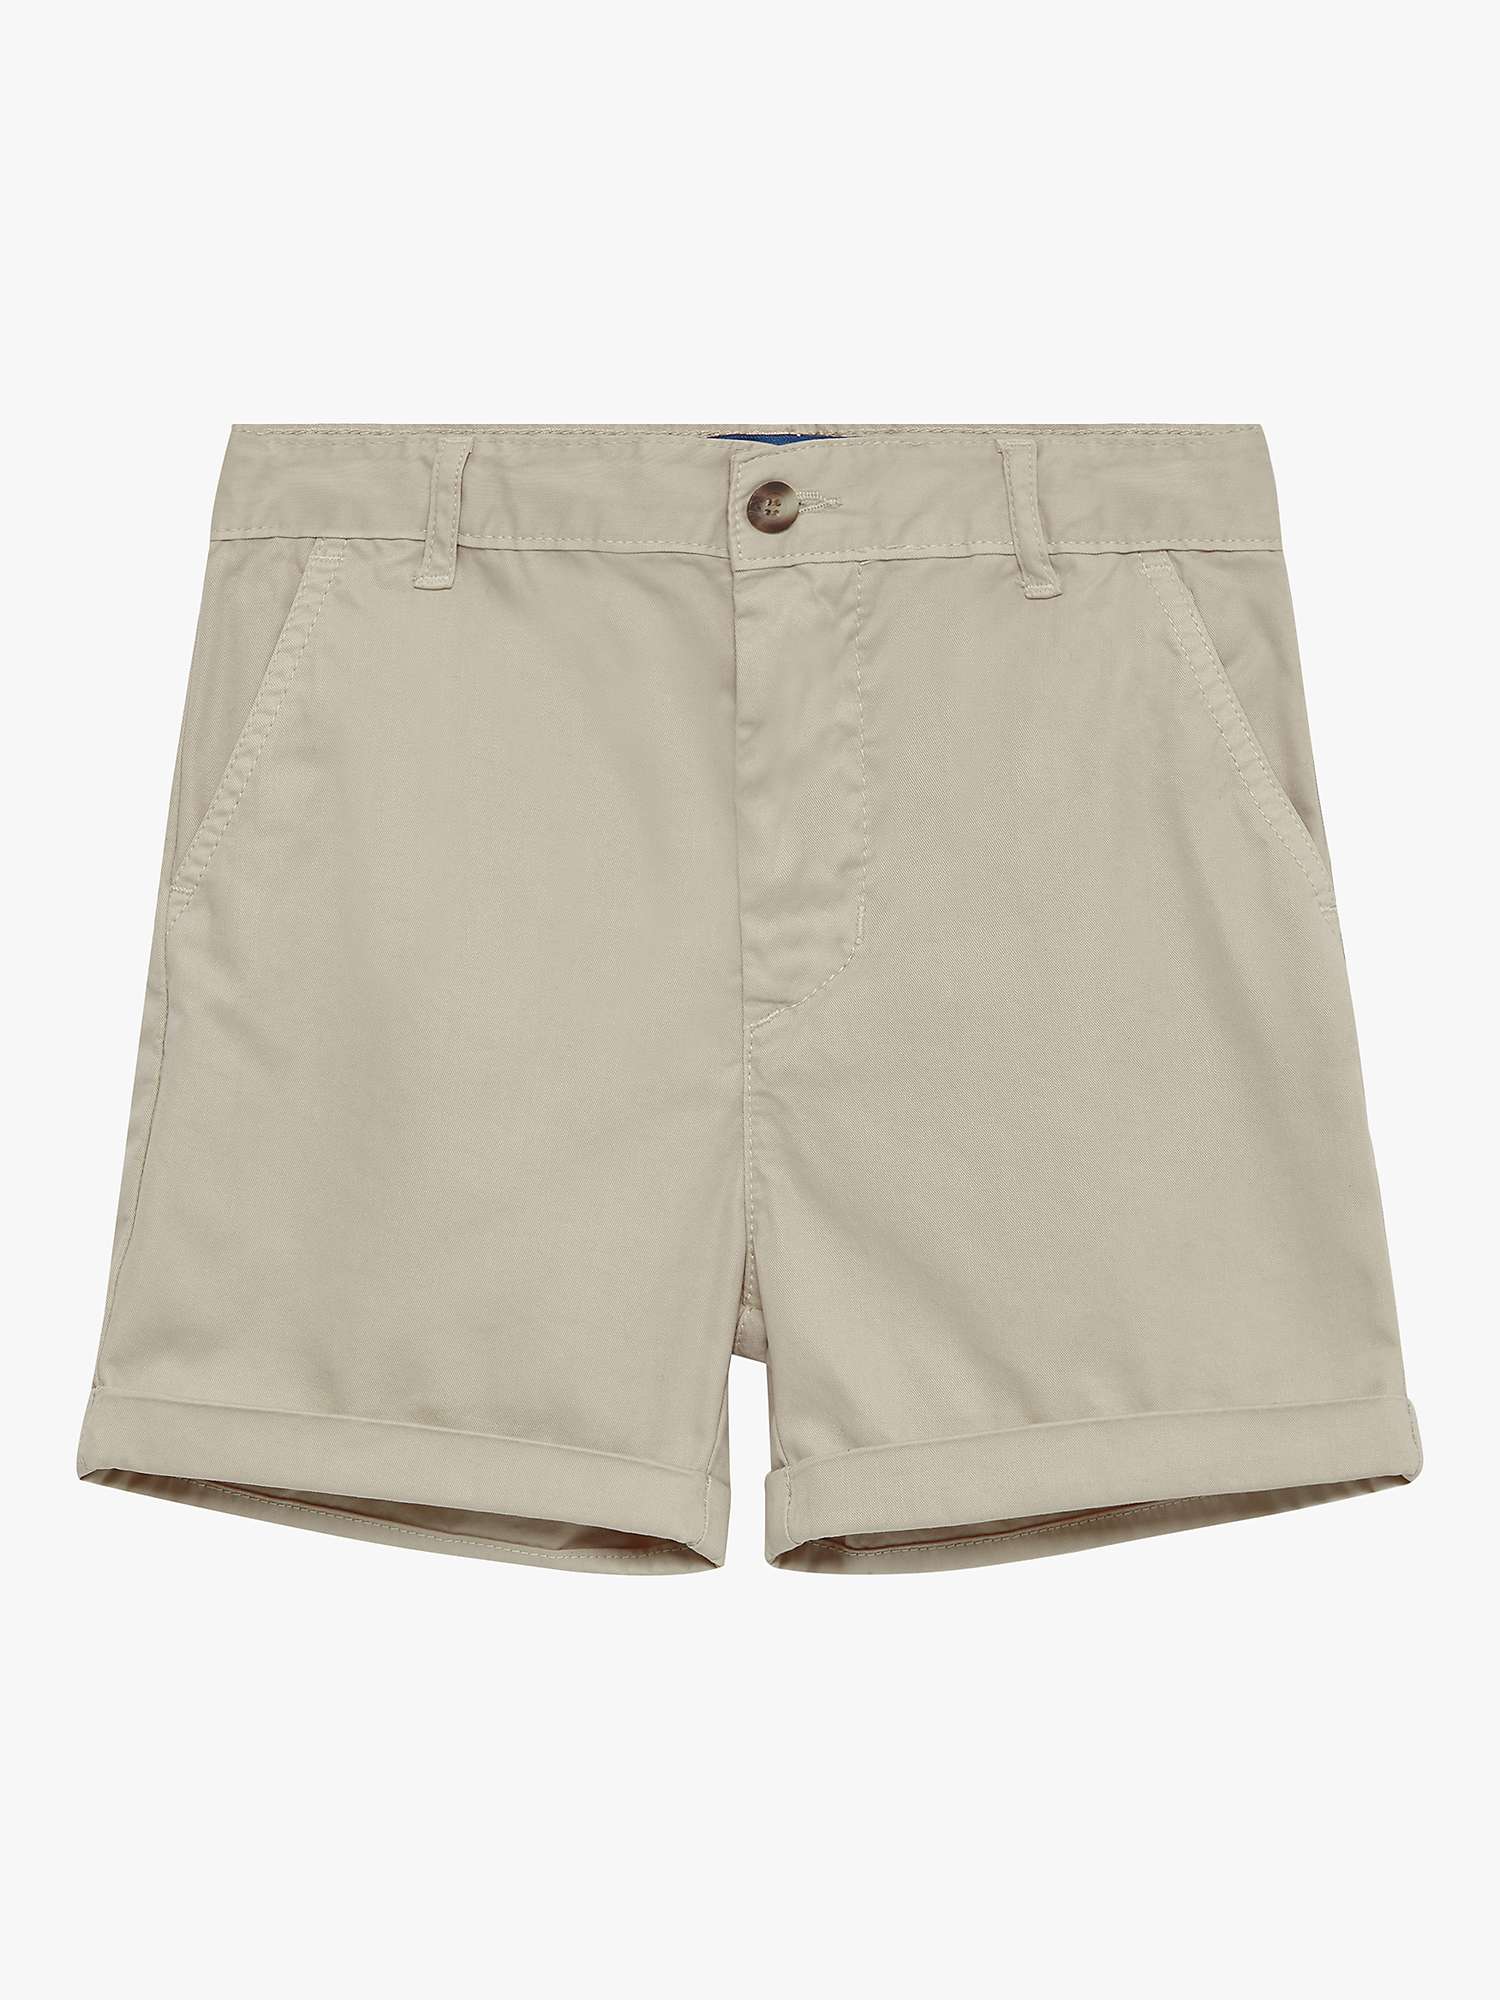 Buy Trotters Thomas Brown Kids' Charlie Chino Shorts Online at johnlewis.com